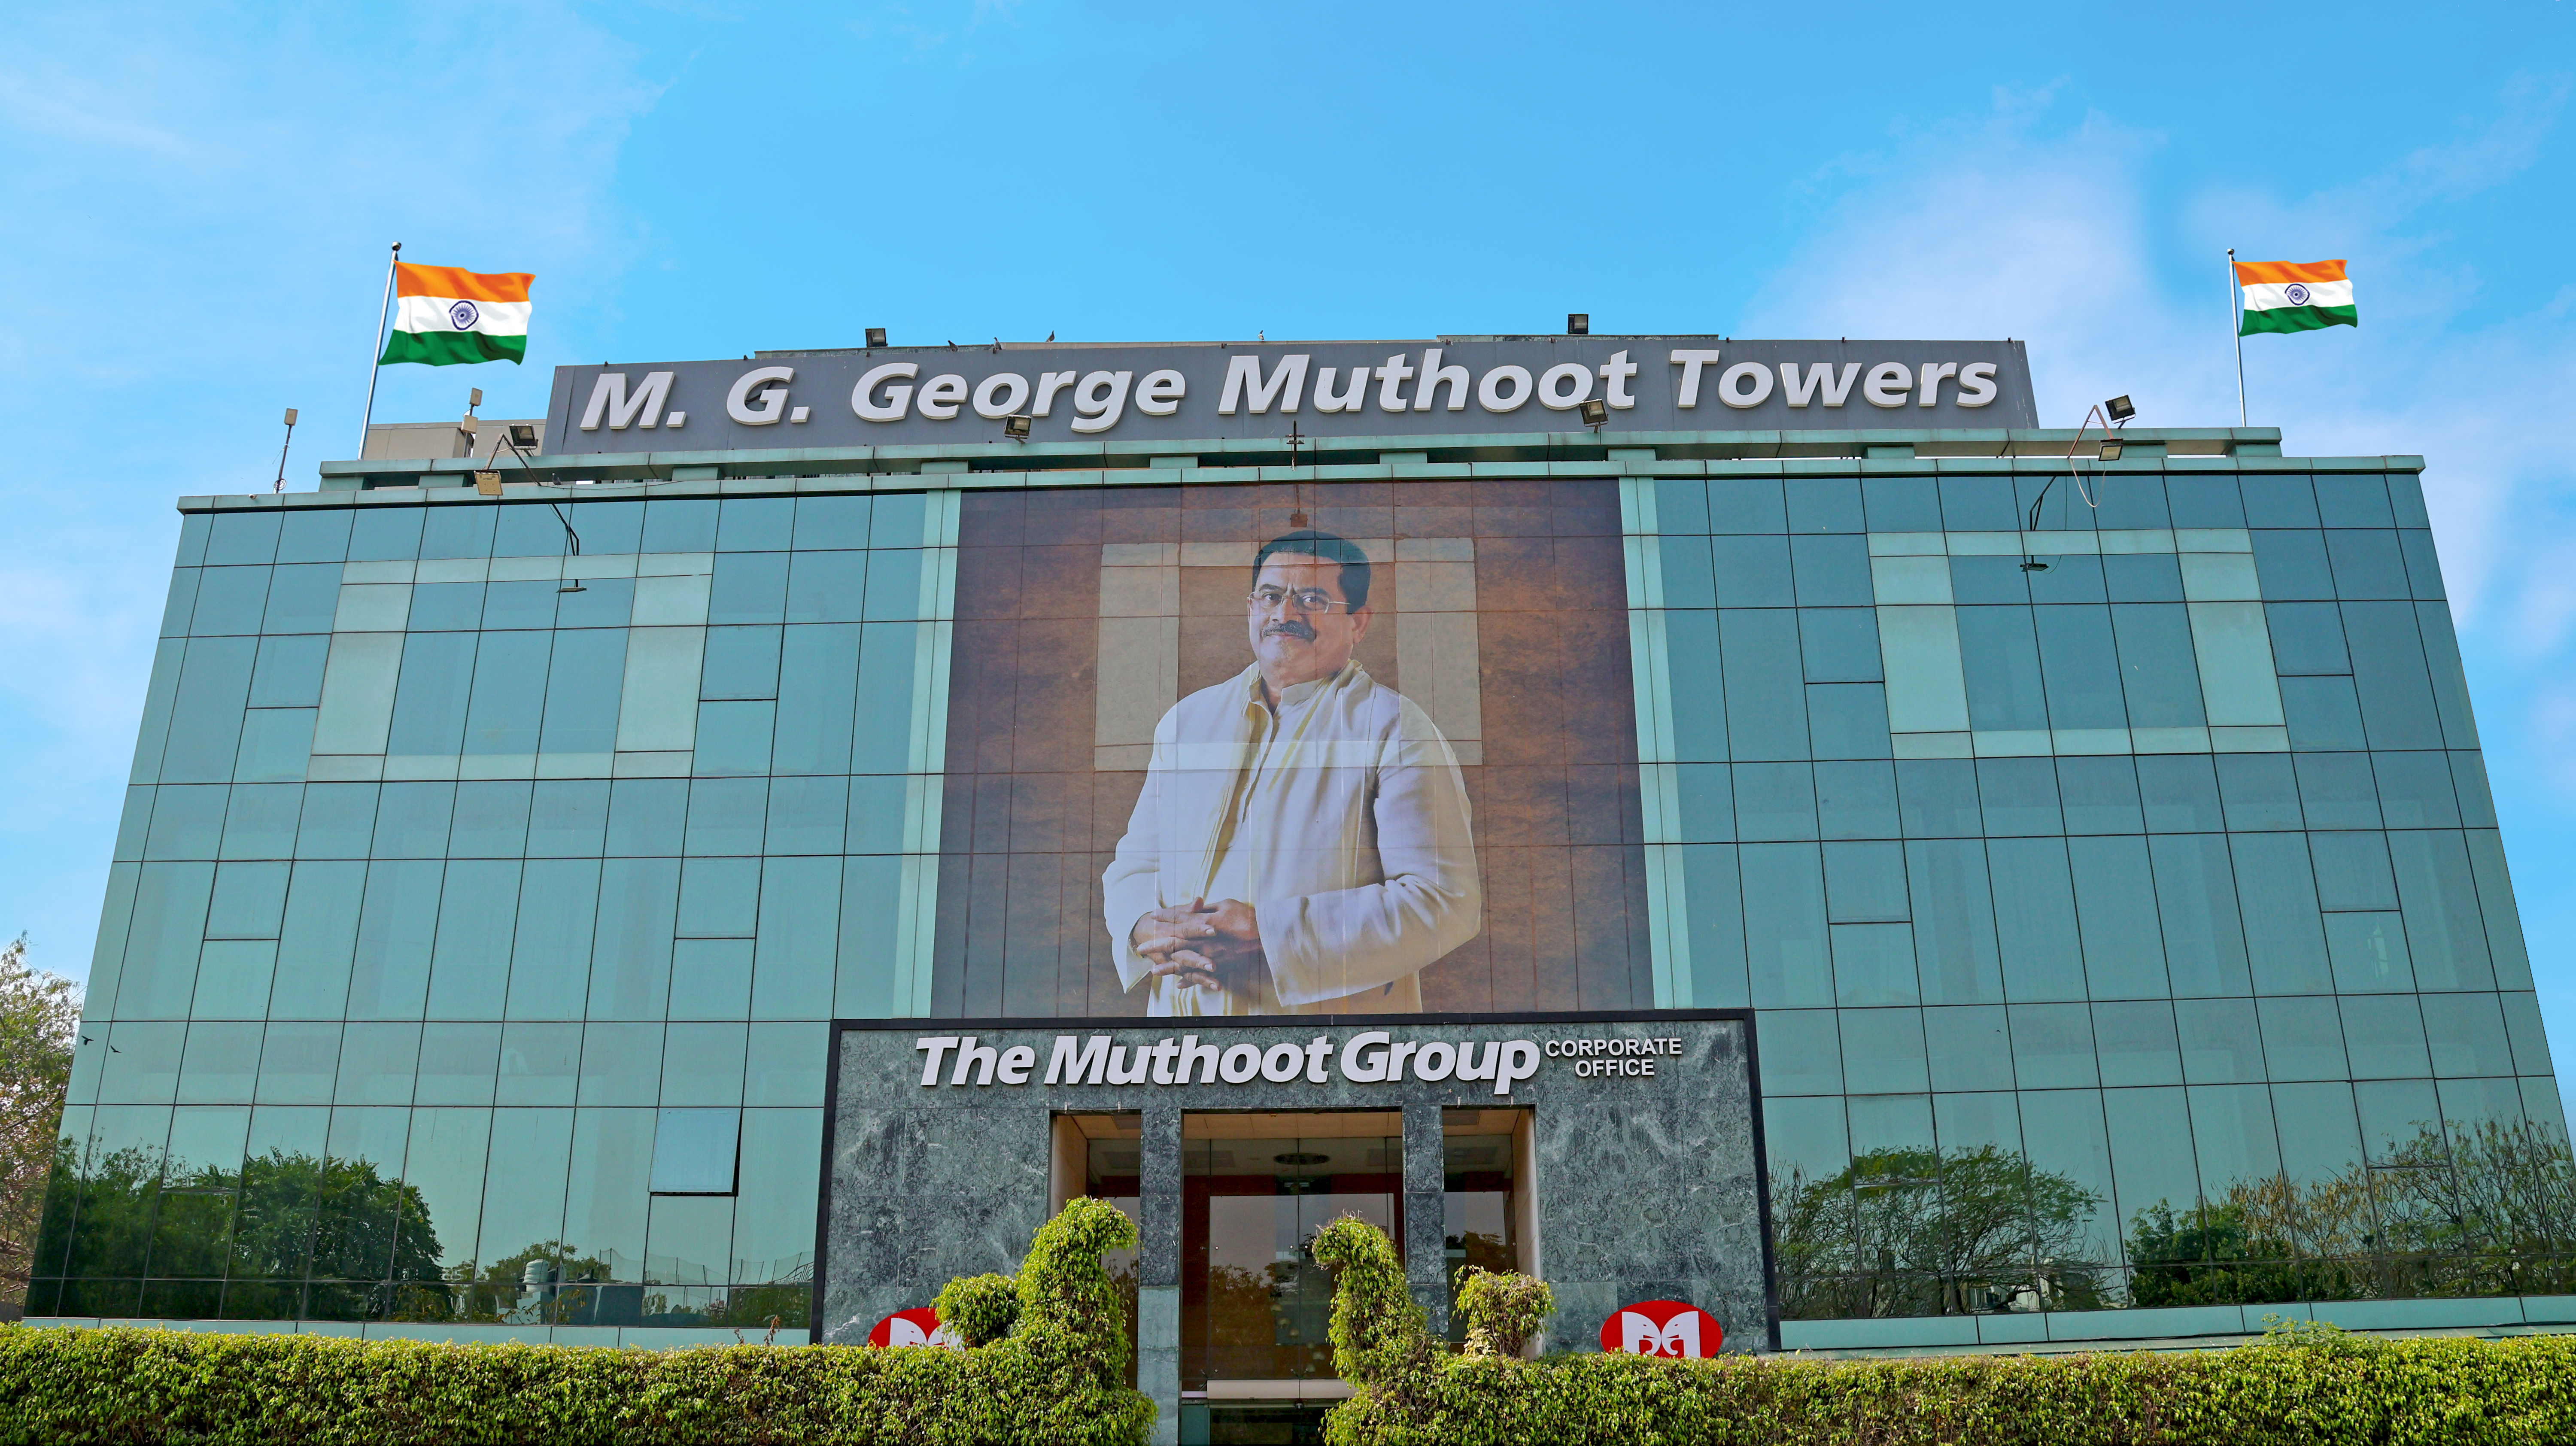 muthoot group towers banner